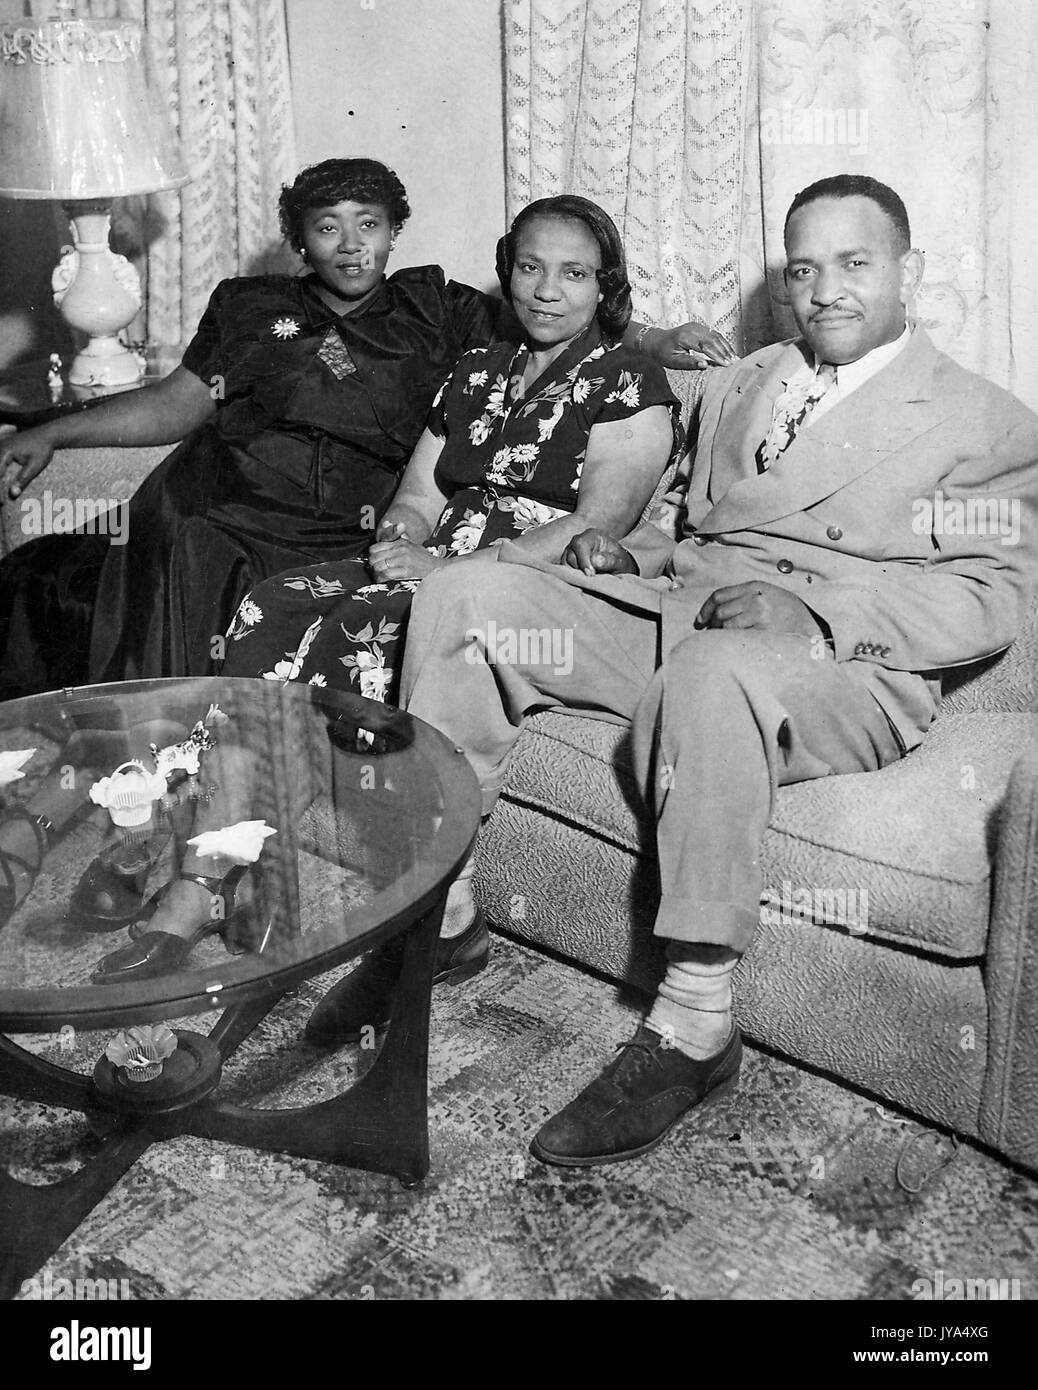 African-American family, father, daughter, and mother sitting on a couch in their home, glass coffee table with figurines visible in the foreground, a lamp and curtains in the background, 1960. Stock Photo